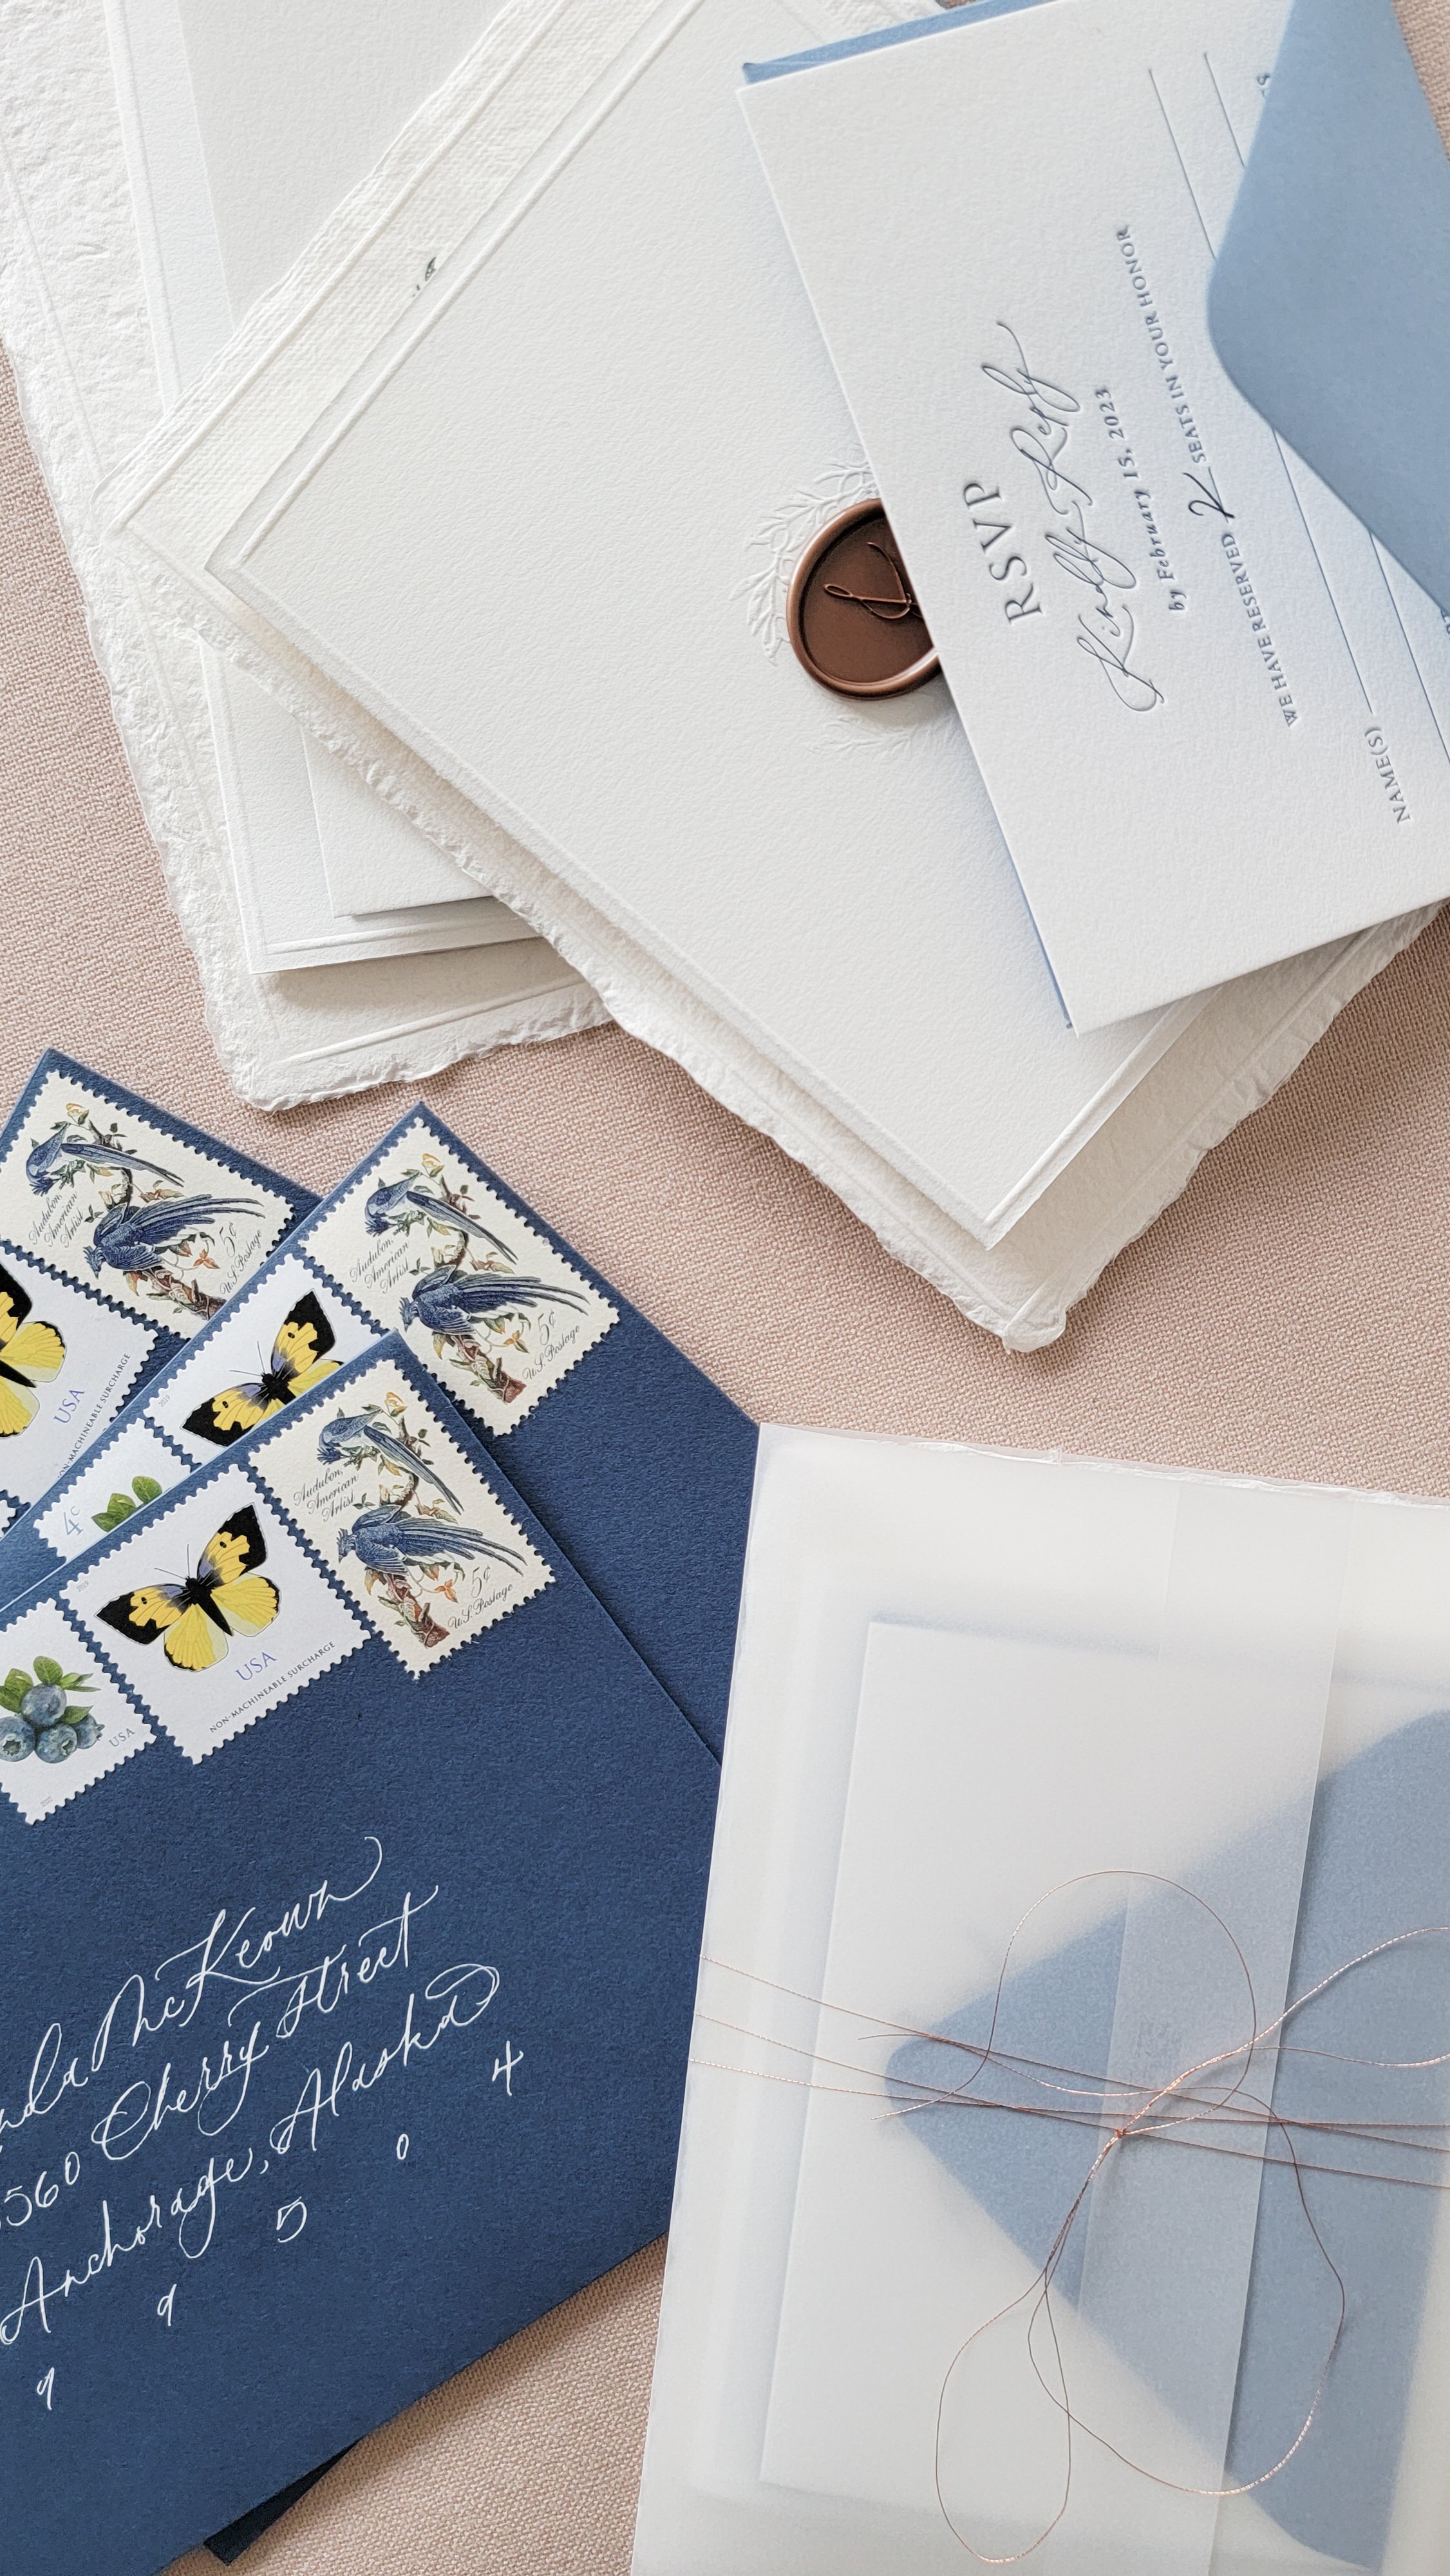 Romantic Wedding Invitations with French Blue Accents and Calligraphed Guest Envelopes | Krisanna Elizabeth Co.jpg